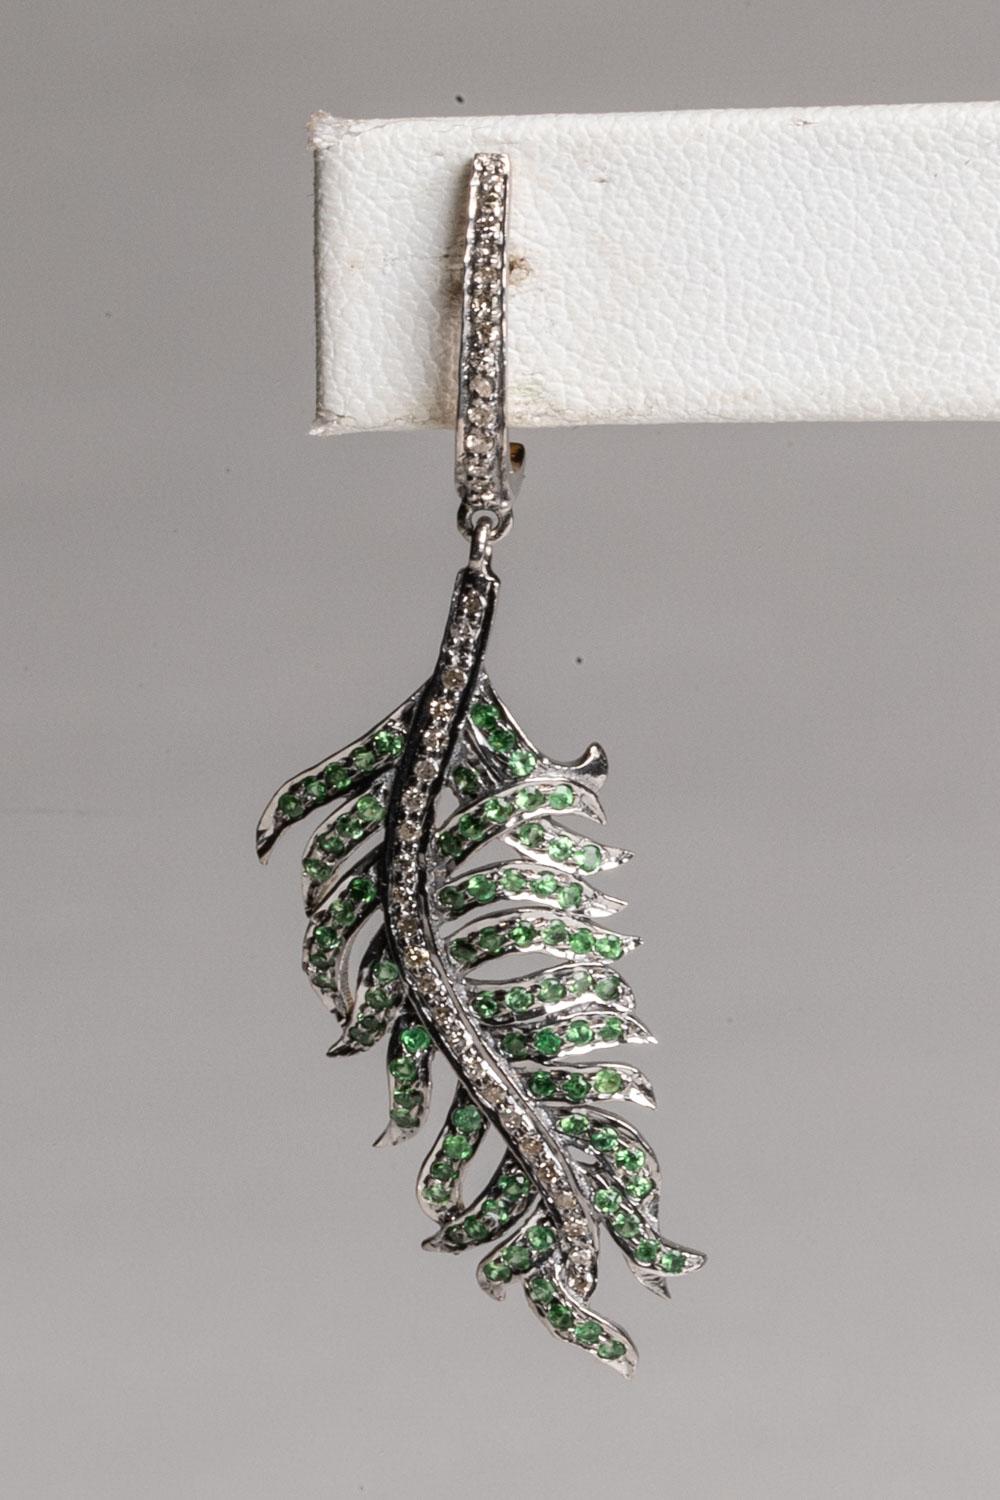 A pair of dangle drop earrings in a leaf design with round, brilliant cut diamonds down the spine, and features round, faceted emeralds as the leaves.  All in a pave`, sterling silver setting. 18K gold post for pierced ears. Total weight of stones